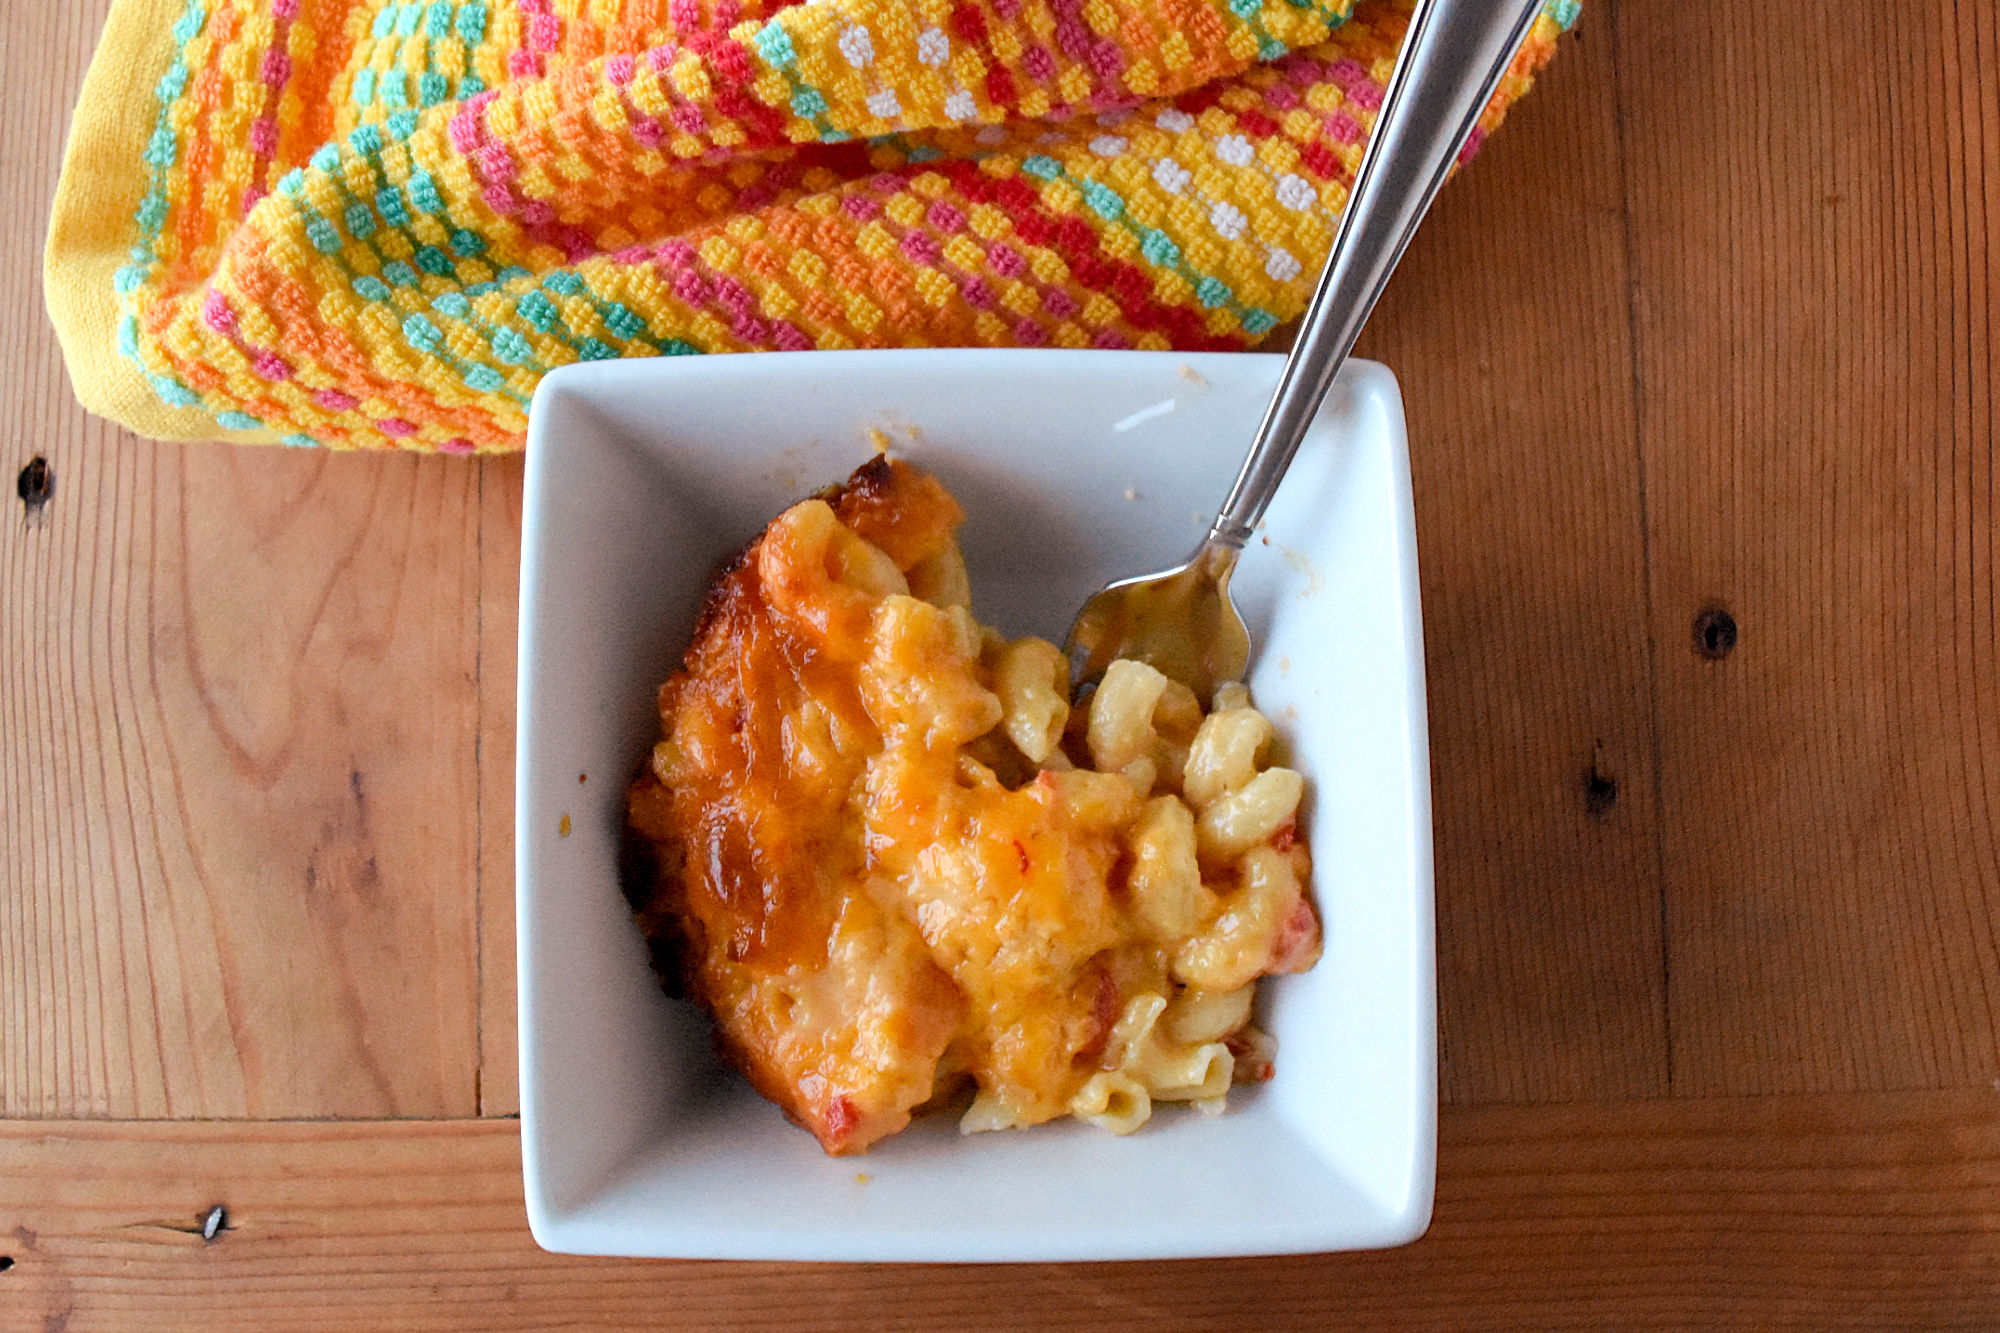 Pimento Cheese Mac and Cheese take a bechamel and adds the southern favorite cheese spread. It makes for a delicious macaroni and cheese with a creamy and salty kick. #NationalDairyMonth